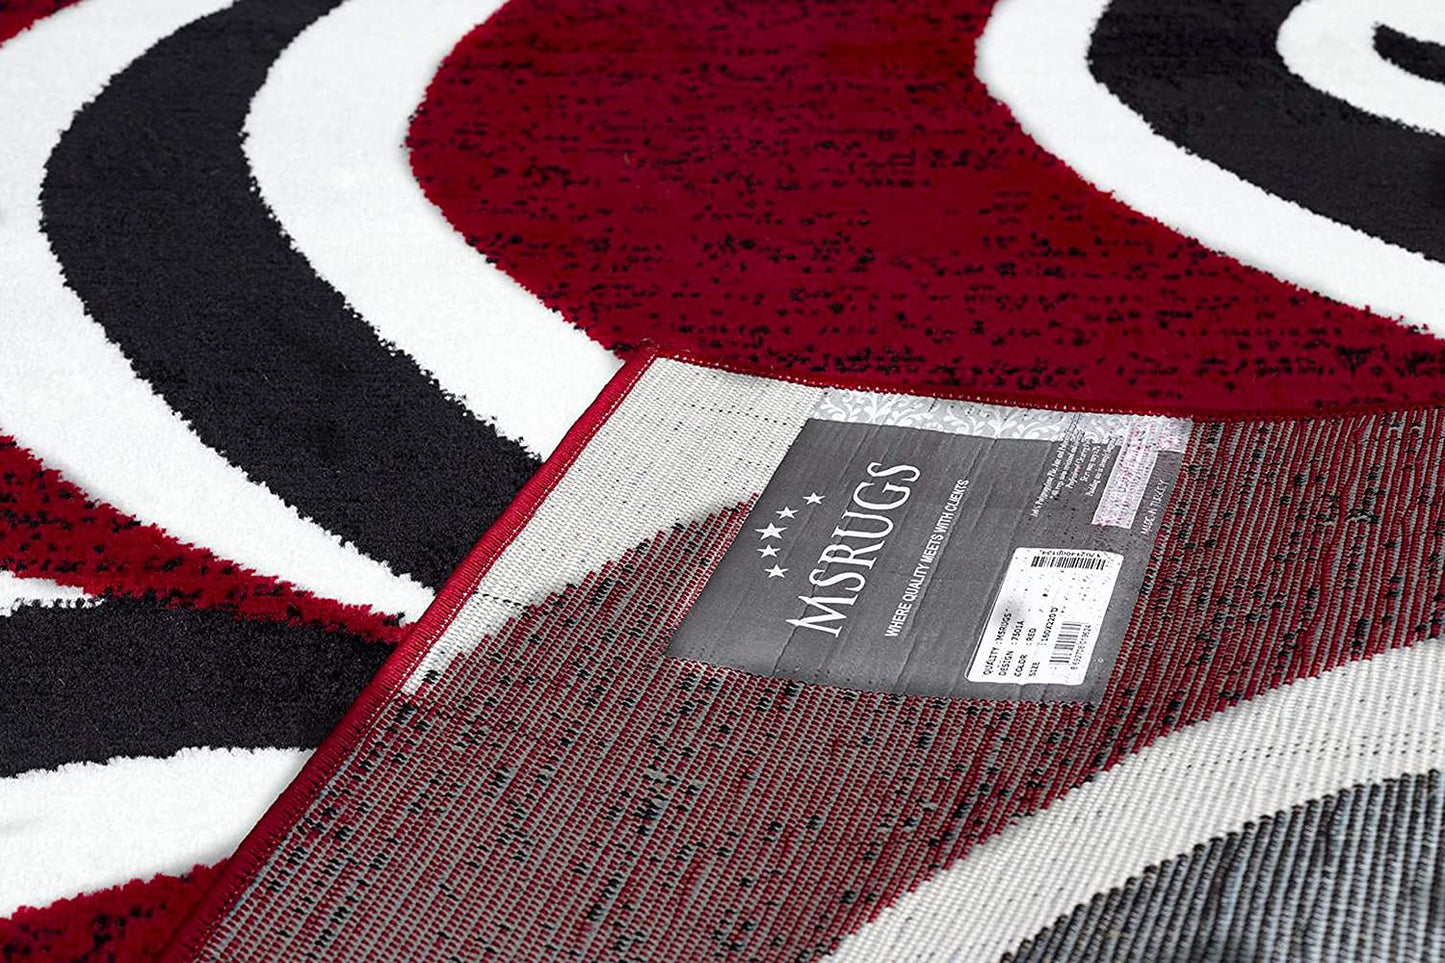  3X8 Frize Collection Modern Red Black White Area Rug